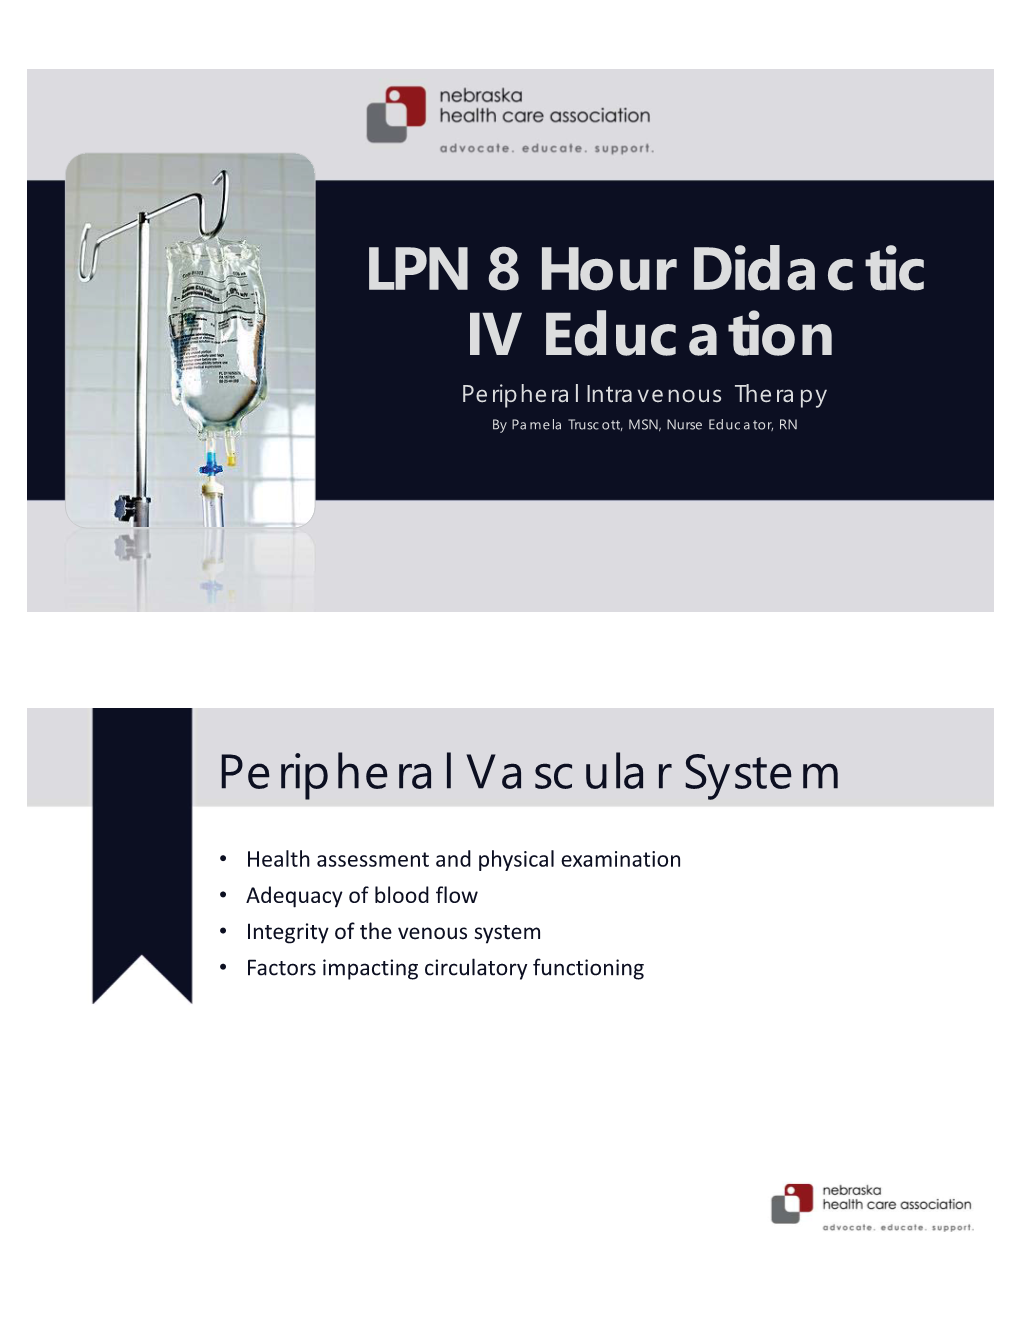 LPN 8 Hour Didactic IV Education Peripheral Intravenous Therapy by Pamela Truscott, MSN, Nurse Educator, RN